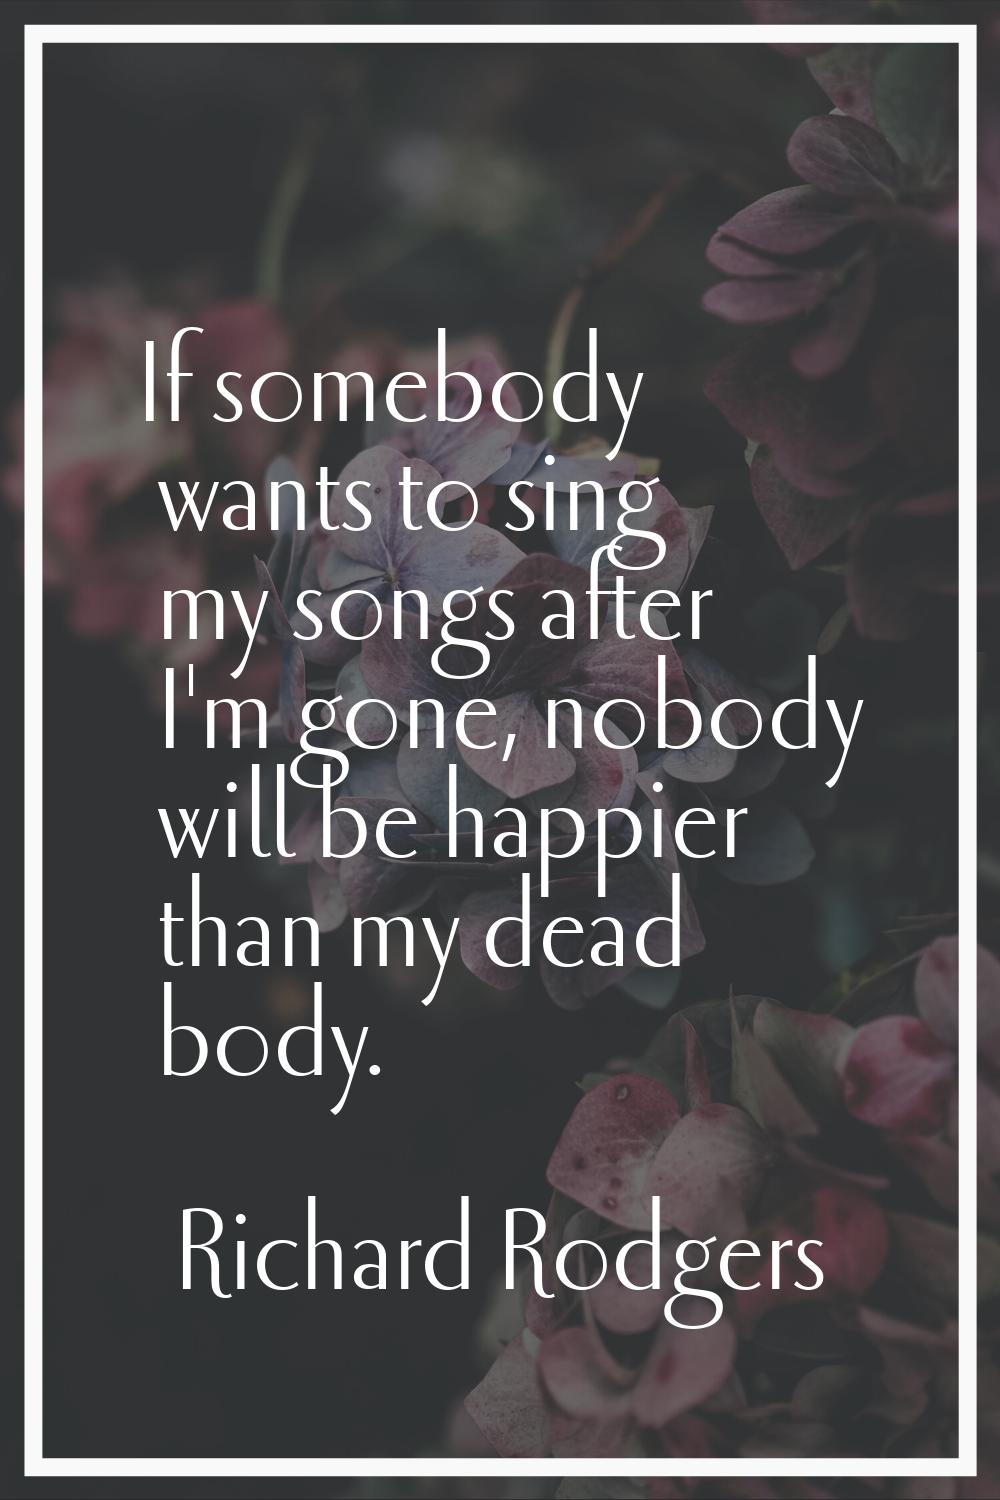 If somebody wants to sing my songs after I'm gone, nobody will be happier than my dead body.